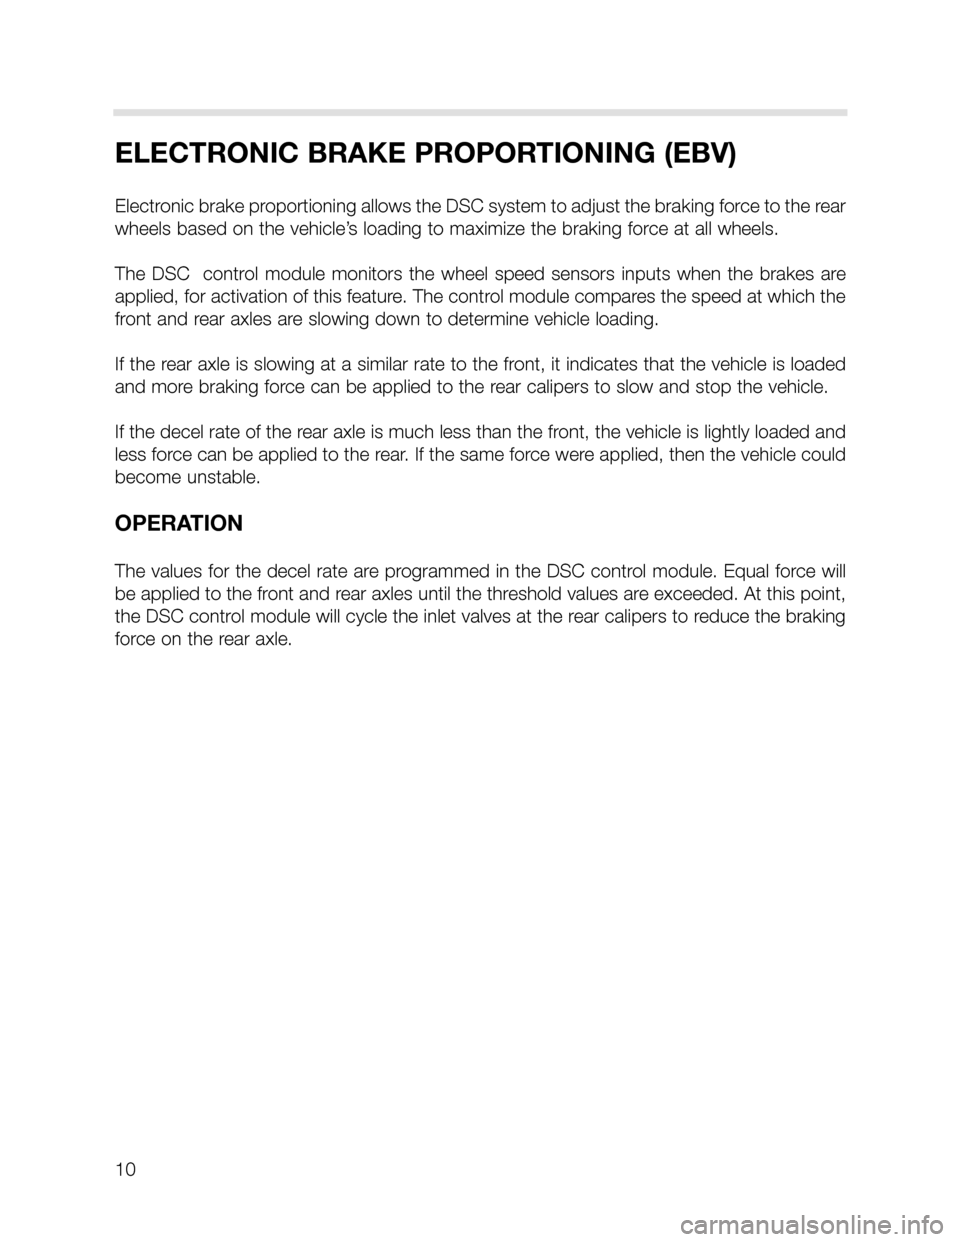 BMW X5 2002 E53 DSC System Workshop Manual 10
ELECTRONIC BRAKE PROPORTIONING (EBV)
Electronic brake proportioning allows the DSC system to adjust the braking force to the rear
wheels based on the vehicle’s loading to maximize the braking for